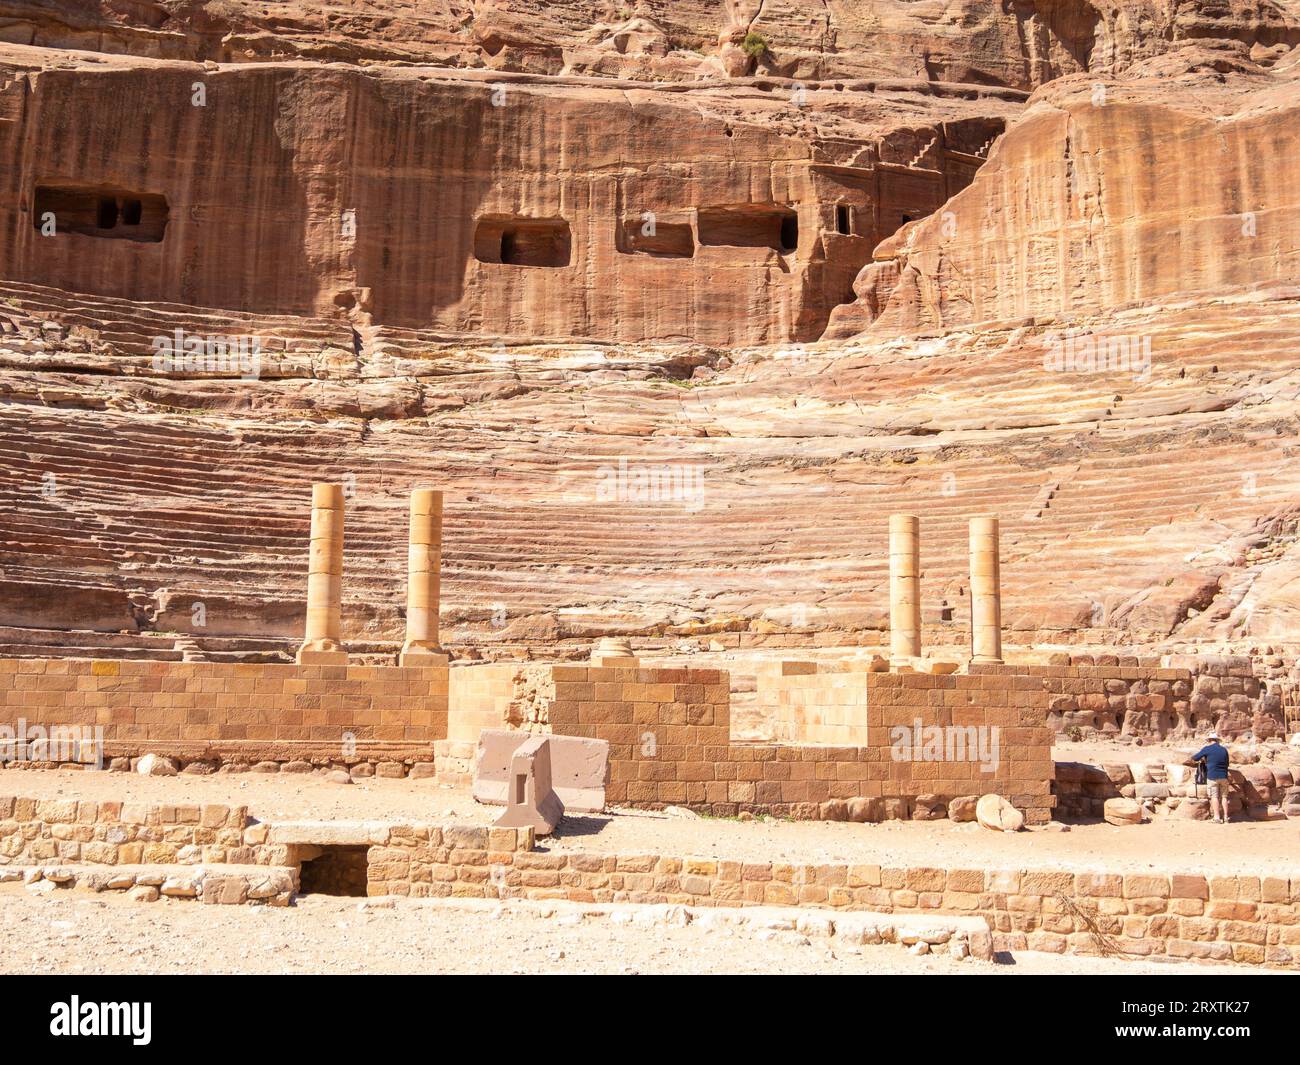 The Theatre, Petra Archaeological Park, UNESCO World Heritage Site, one of the New Seven Wonders of the World, Petra, Jordan, Middle East Stock Photo